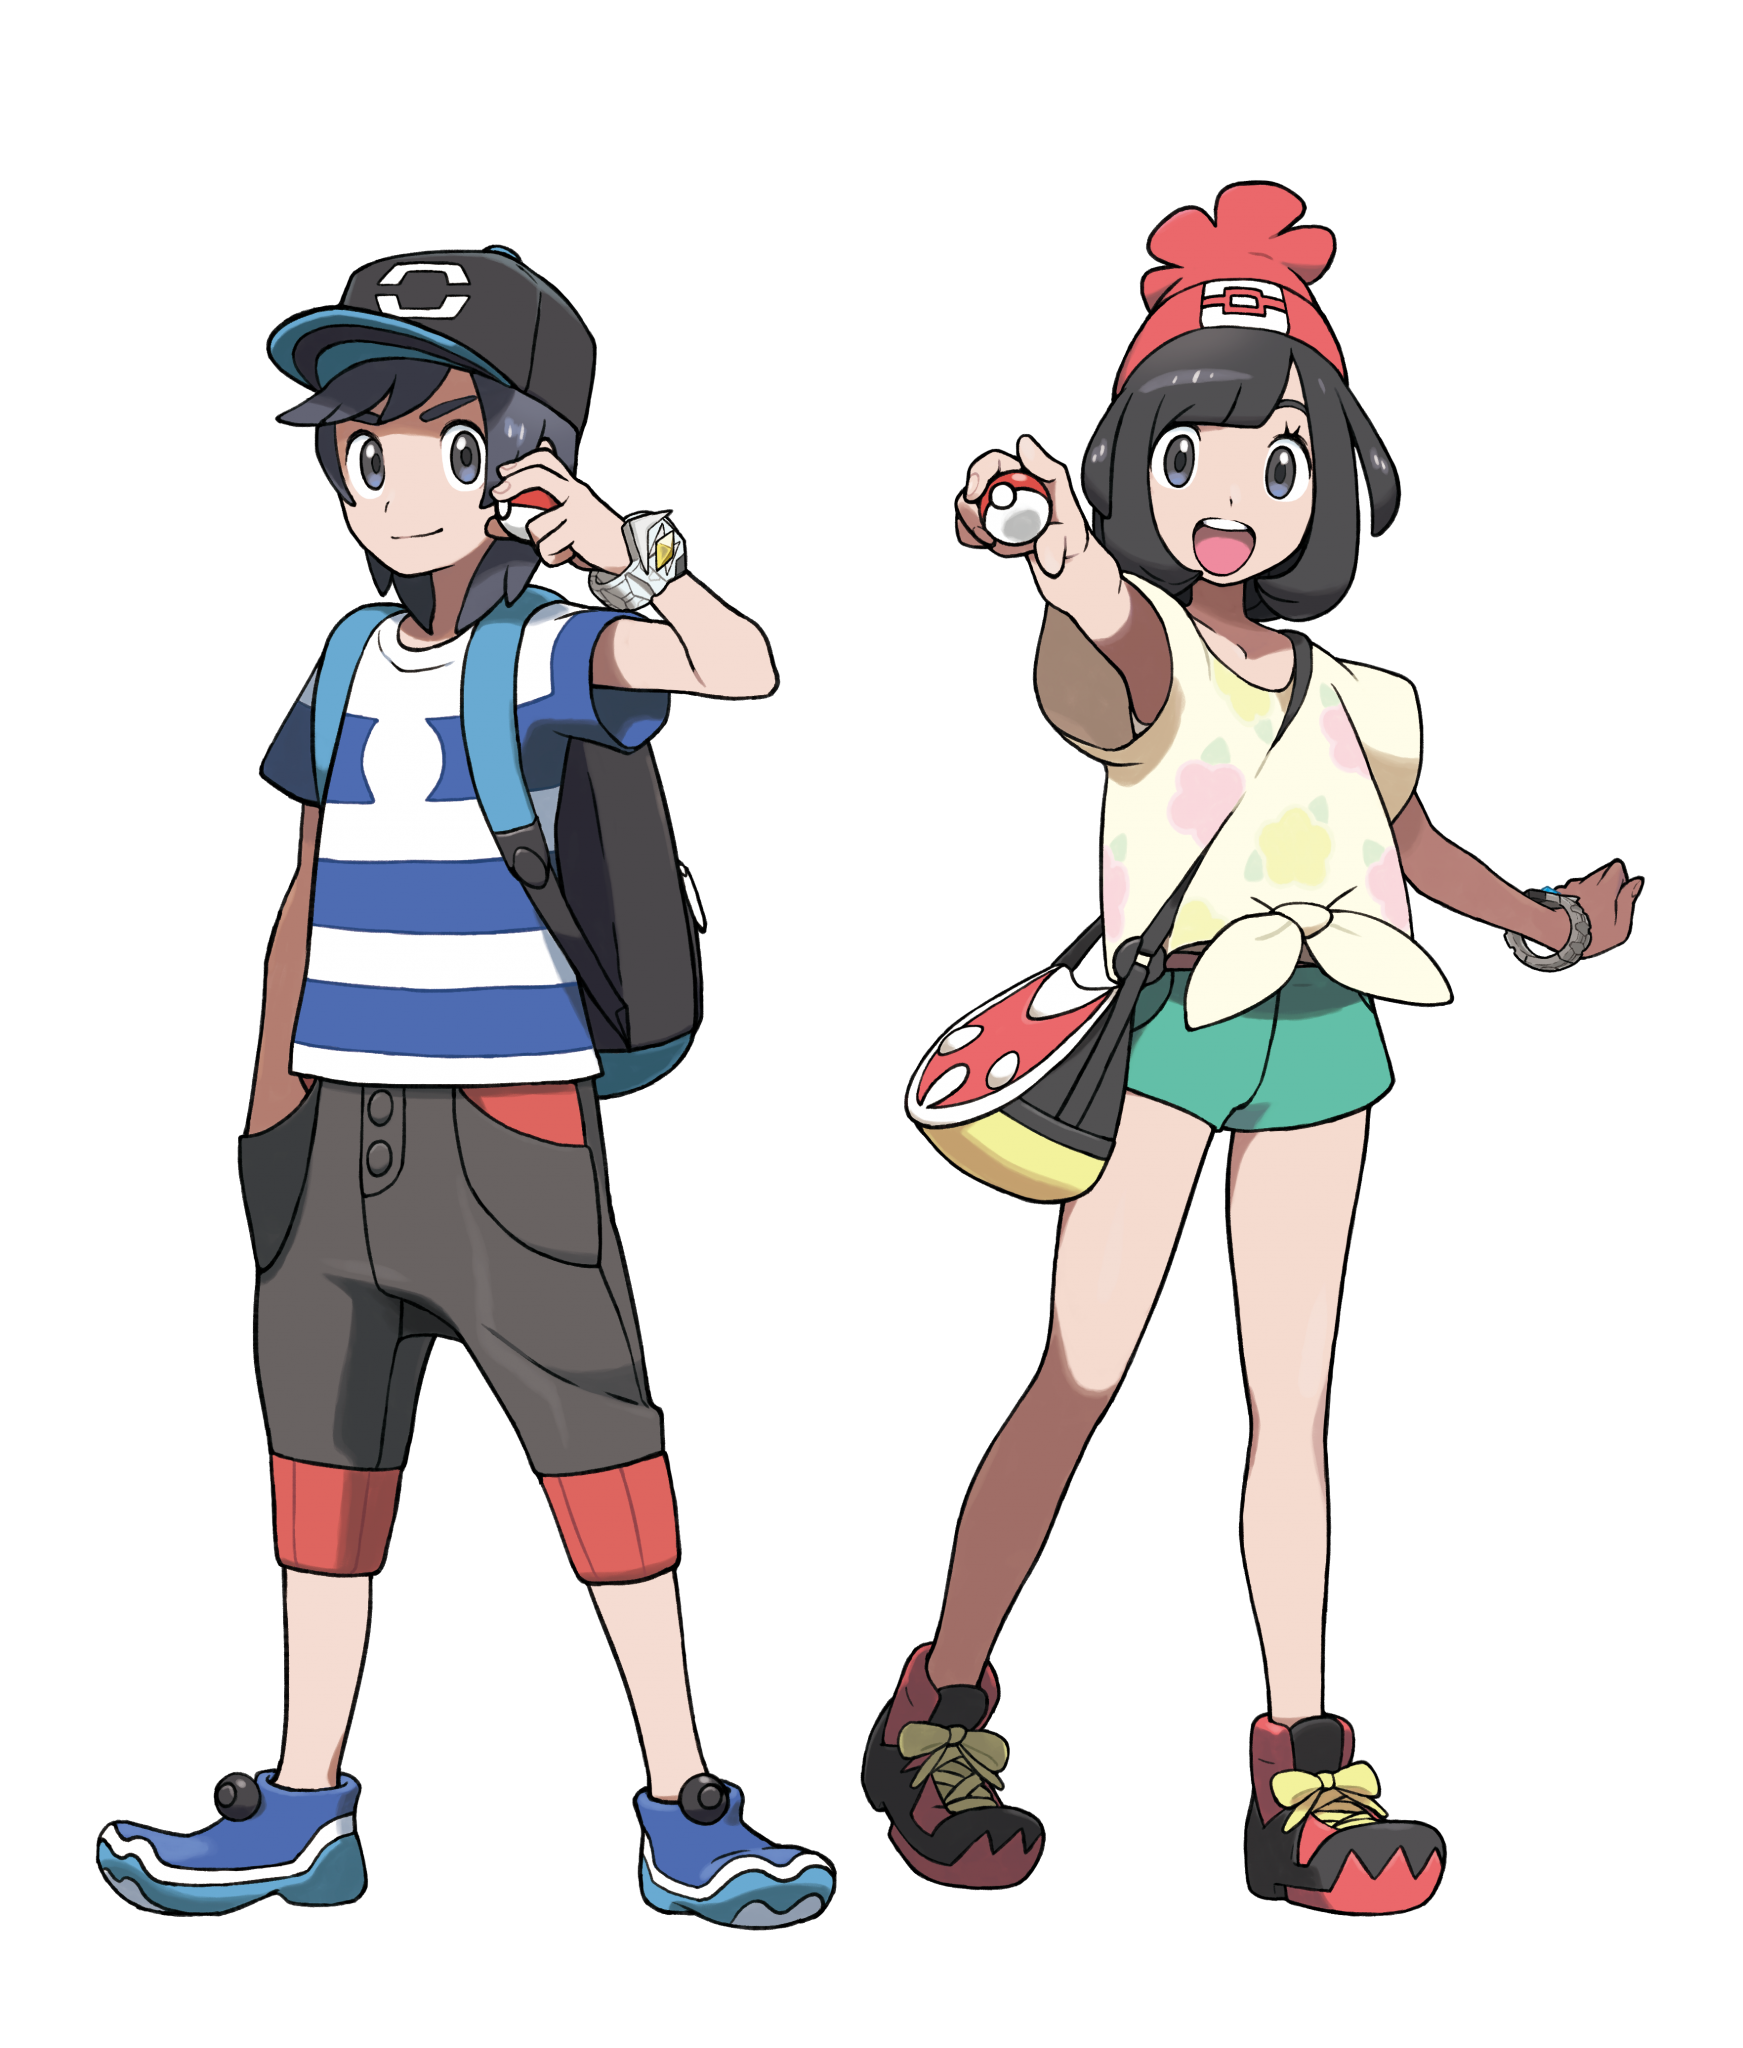 Pokemon SUN and MOON Trainers by SYKER-SIX on DeviantArt